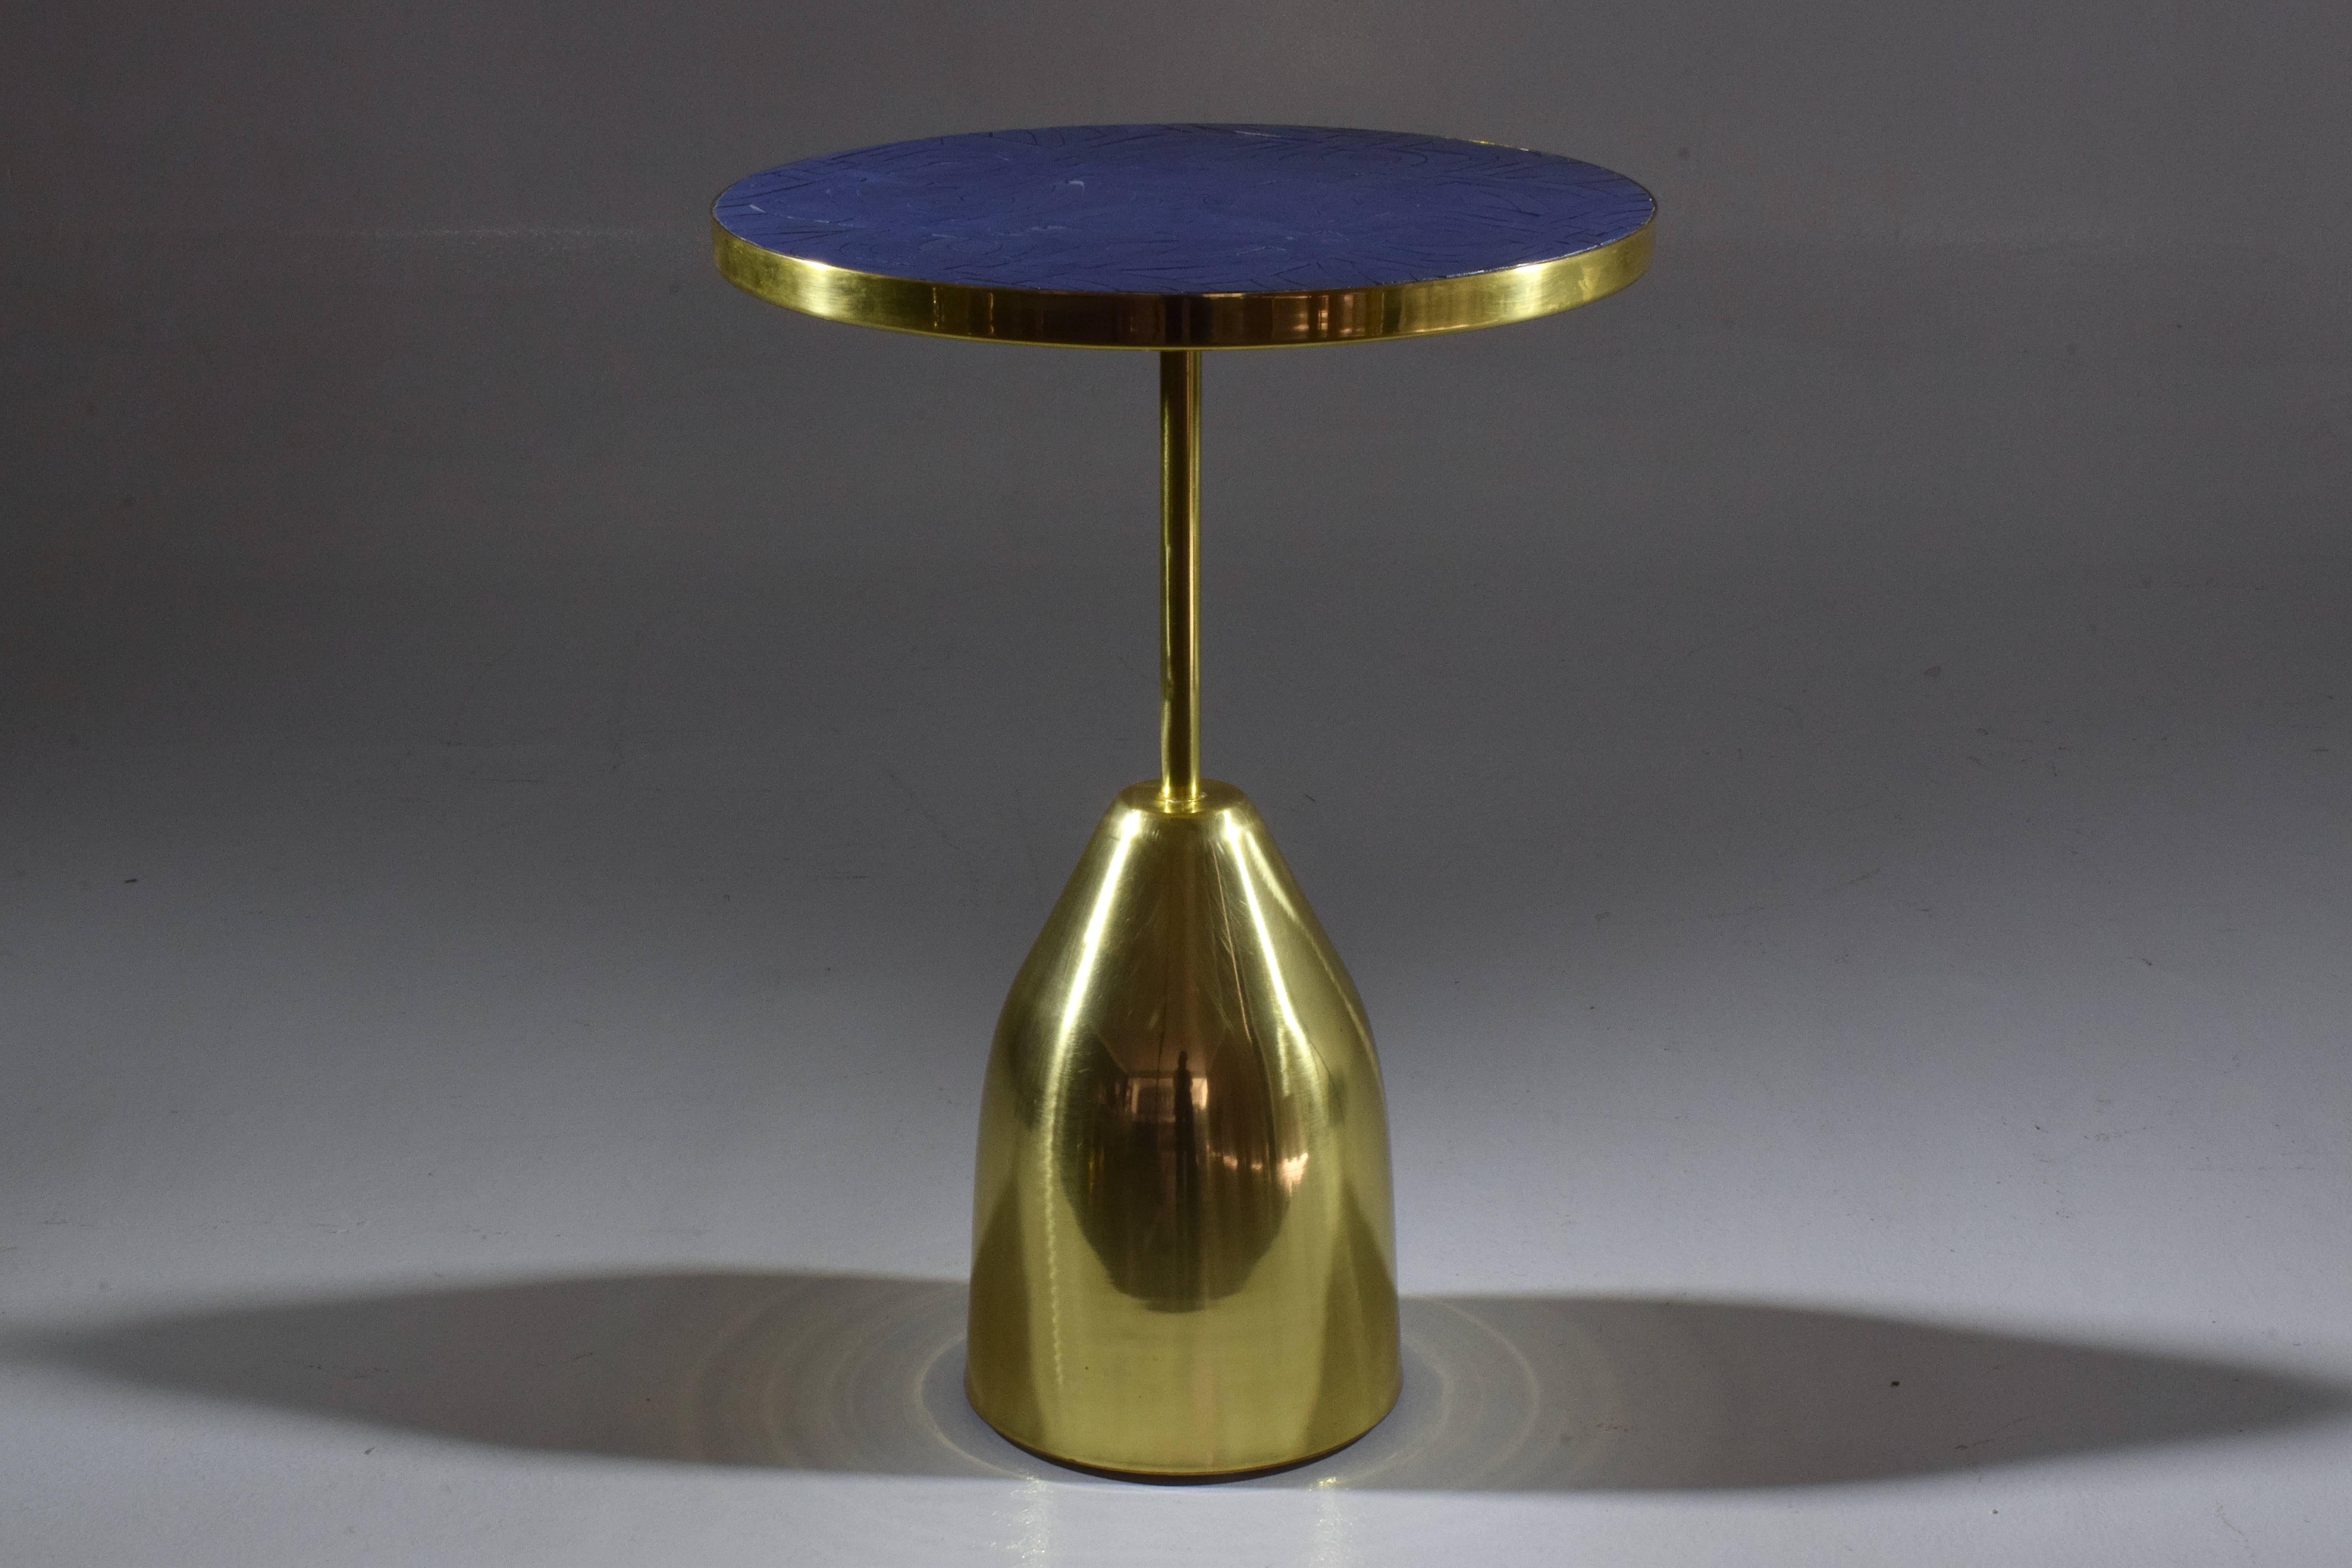 Contemporary handcrafted guéridon side table composed of a solid brass structure and designed with an intricate blue mosaic tile tabletop modern graphic zellige design. The Zel.II.III.360 is part of the Flow collection, an ode to movement created by